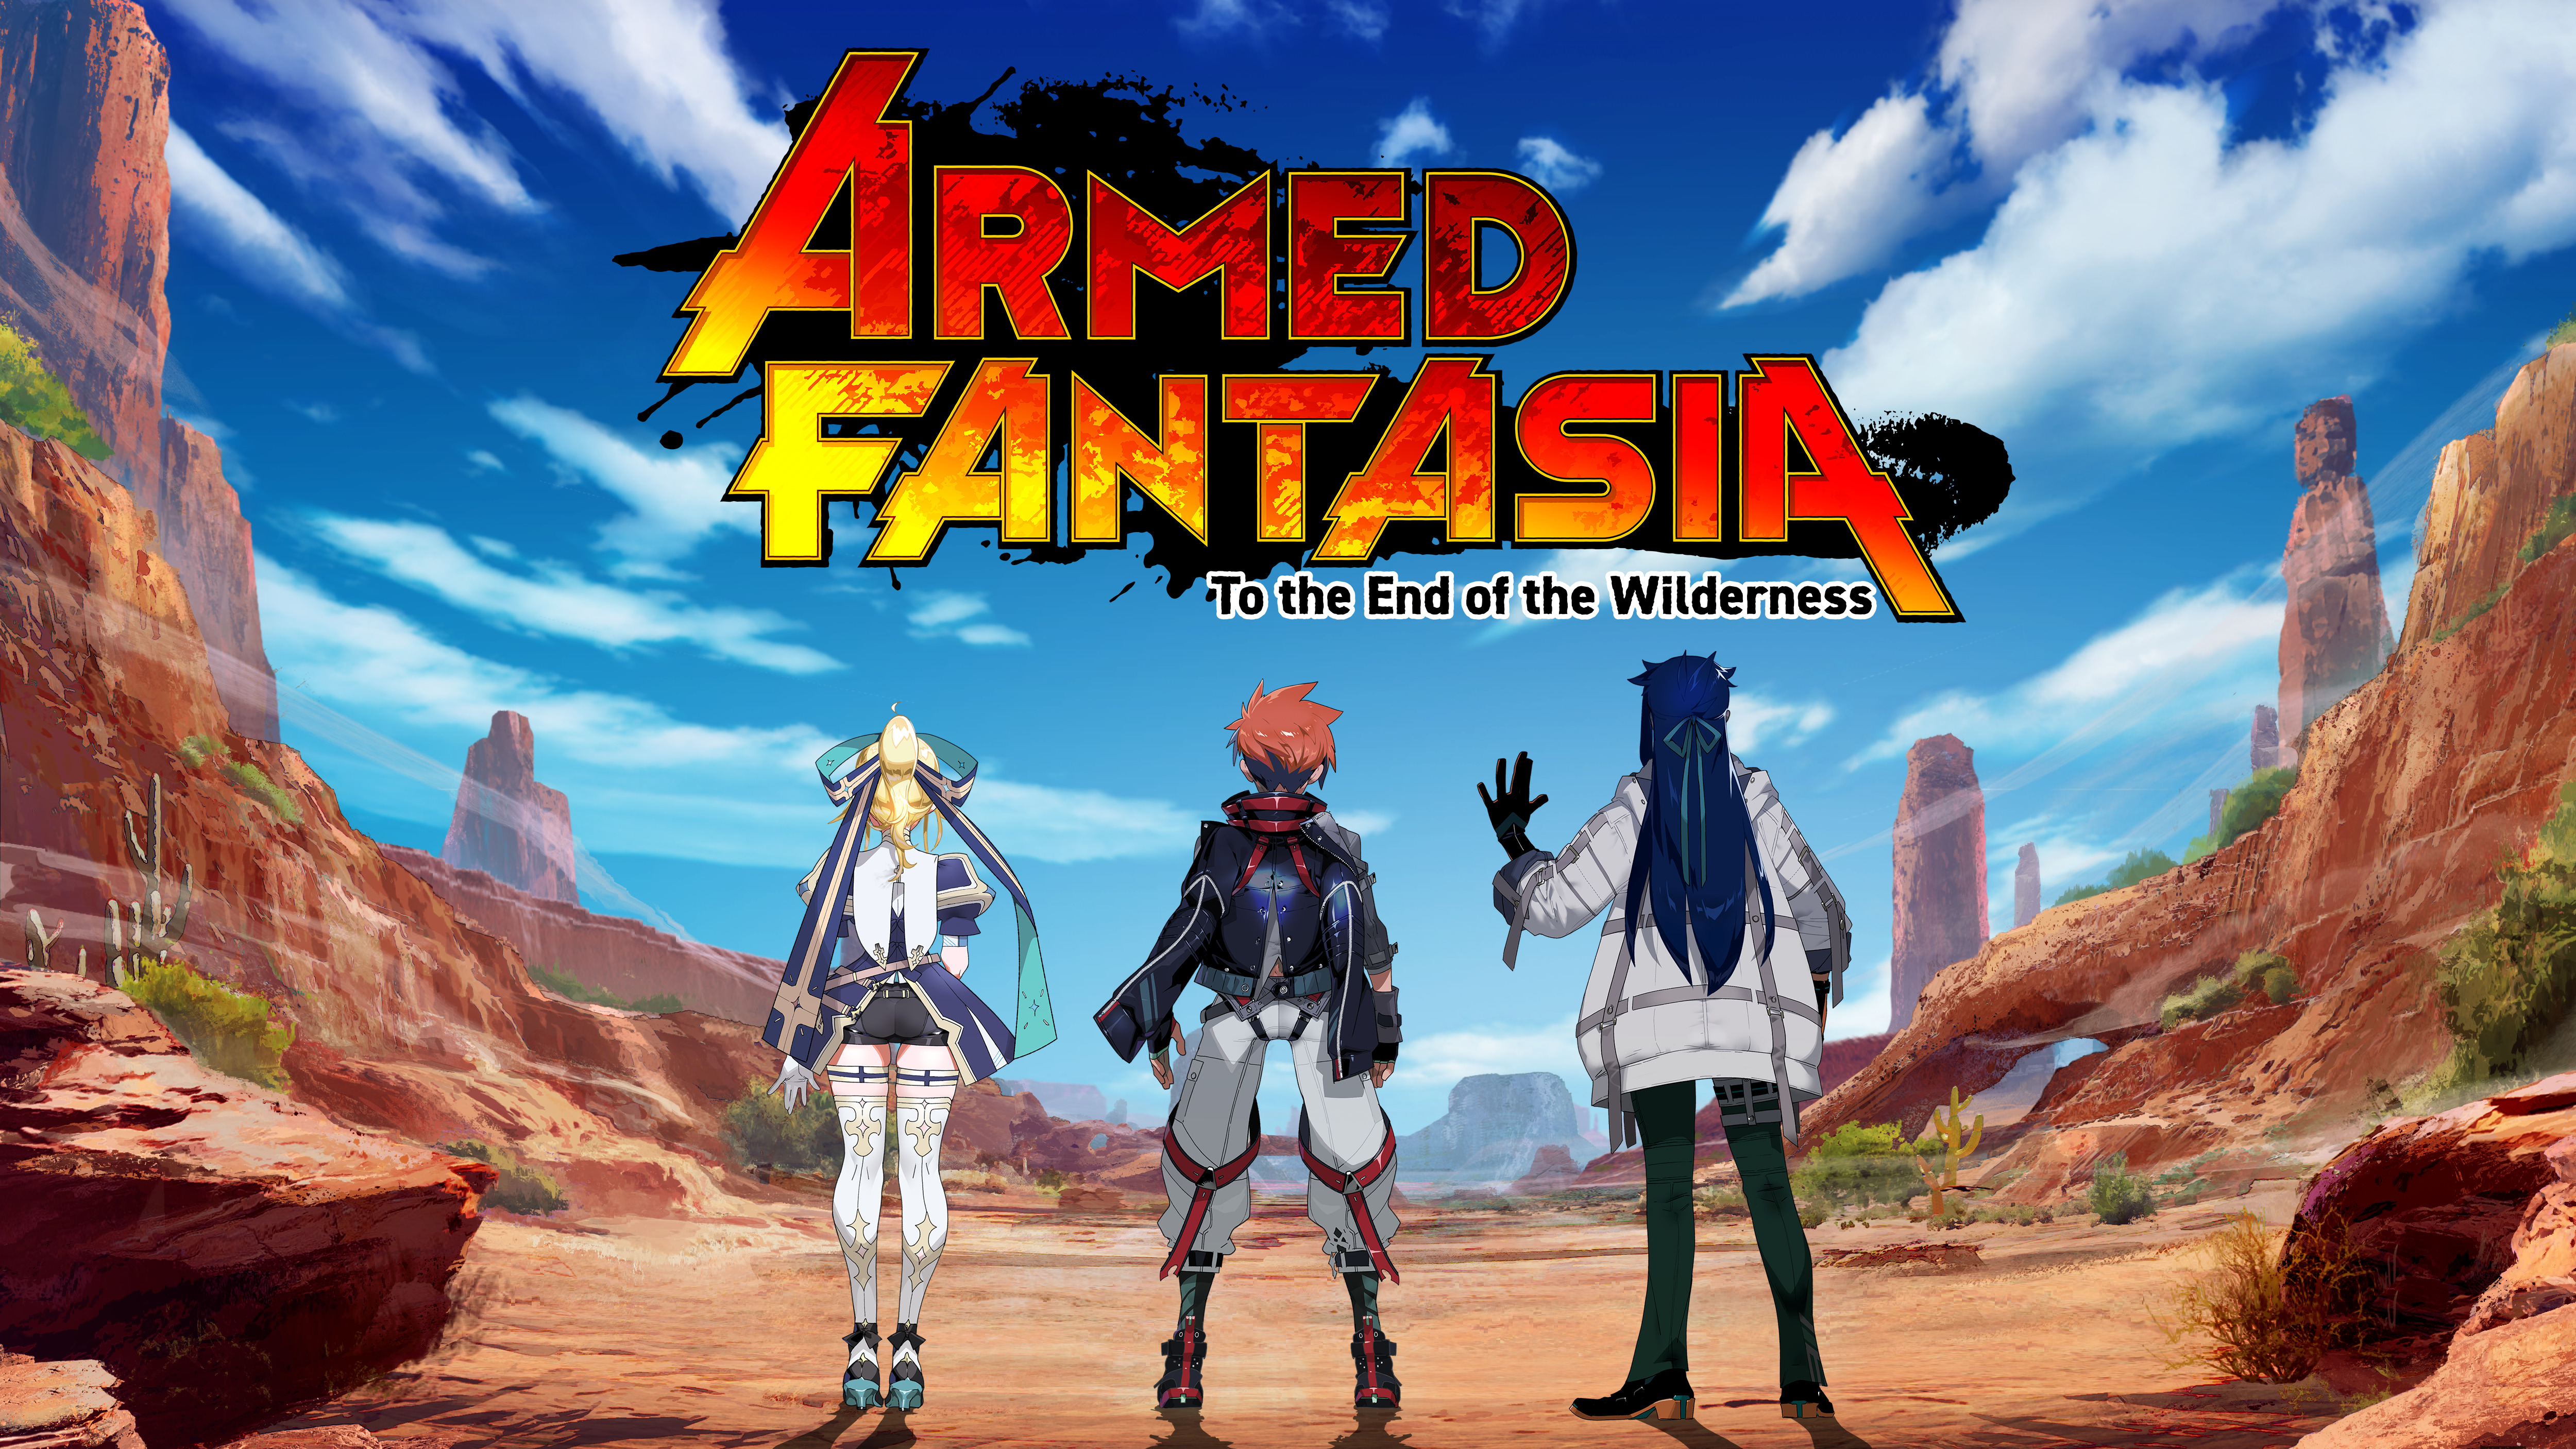 Armed Fantasia: To the End of the Wilderness title art